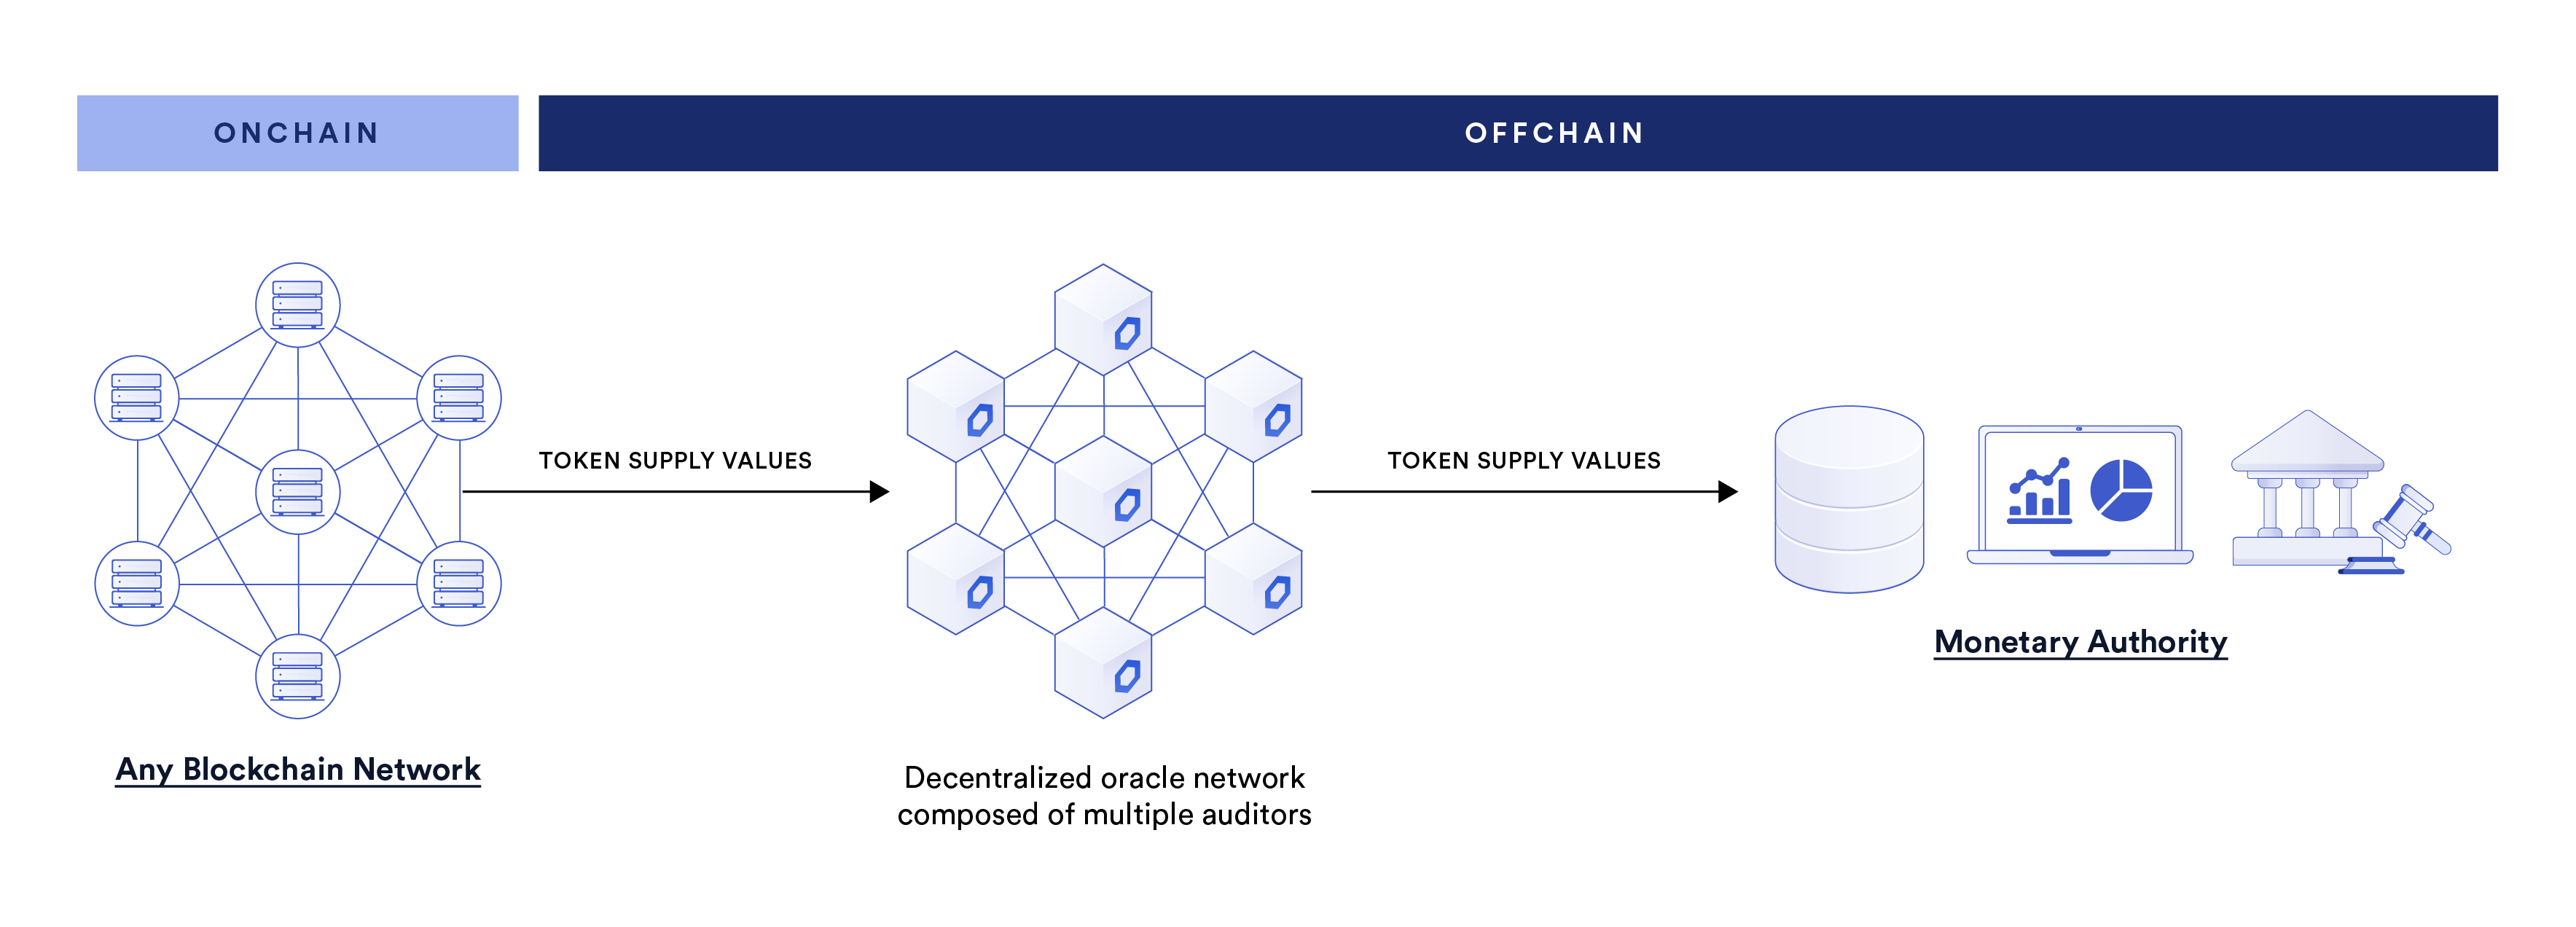 Chainlink Proof of Reserve for monitoring stablecoin token supplies across many blockchain networks.